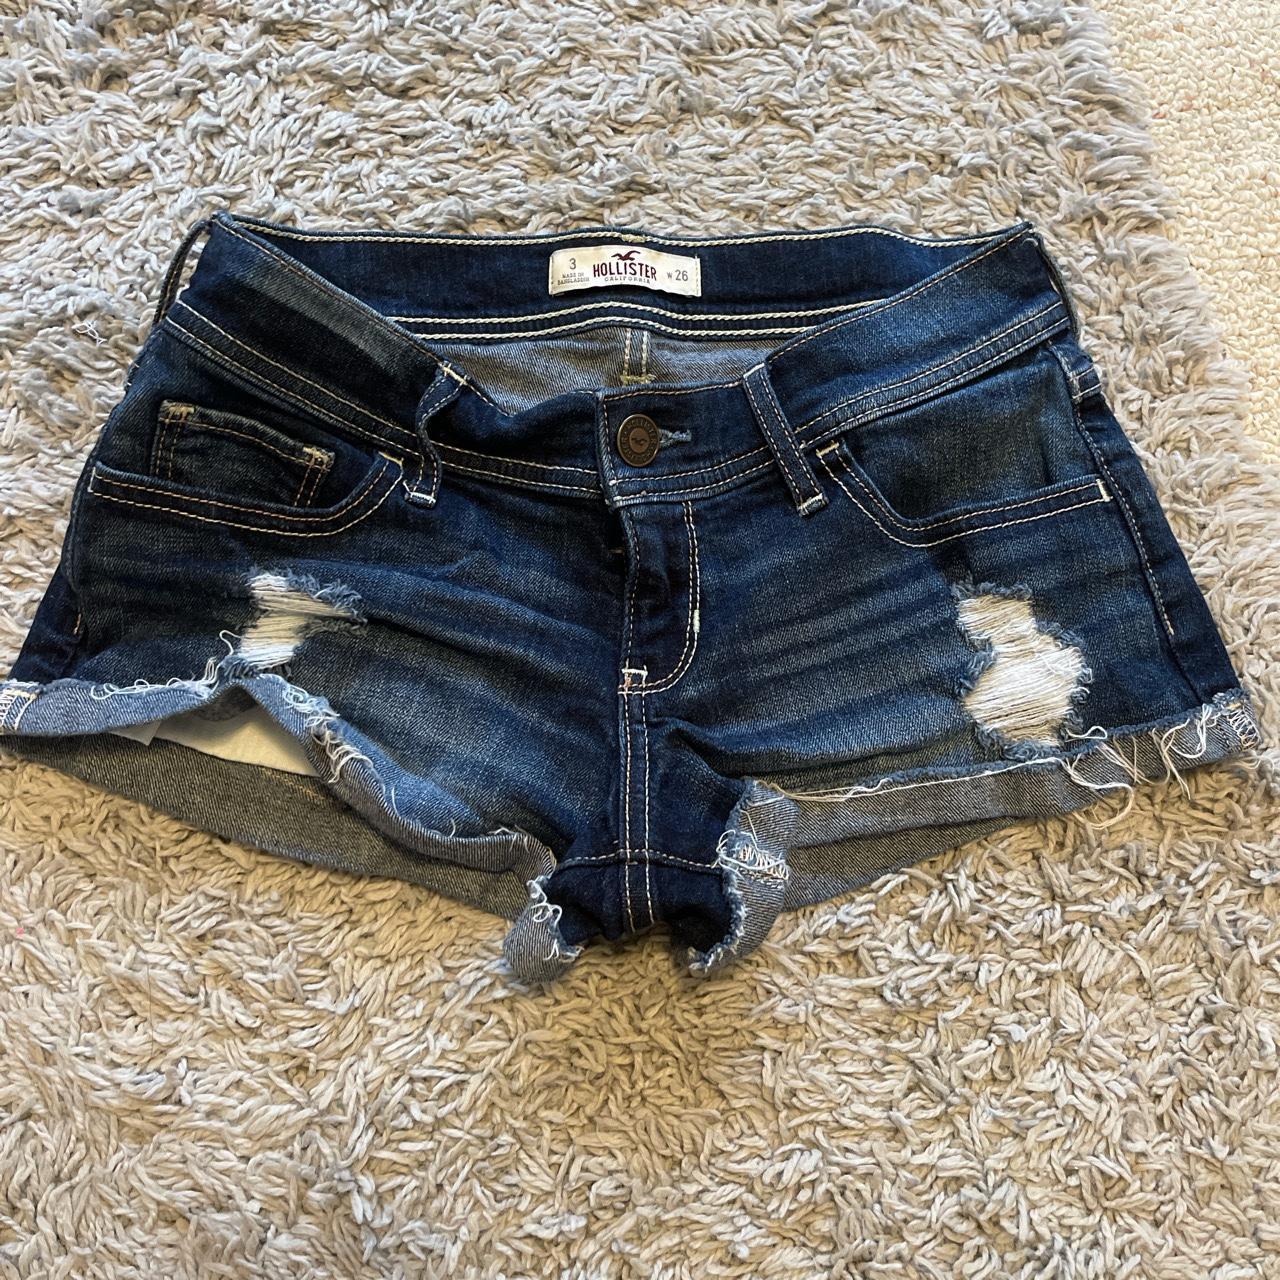 Hollister jean shorts. Size 3 w 26. Very short and